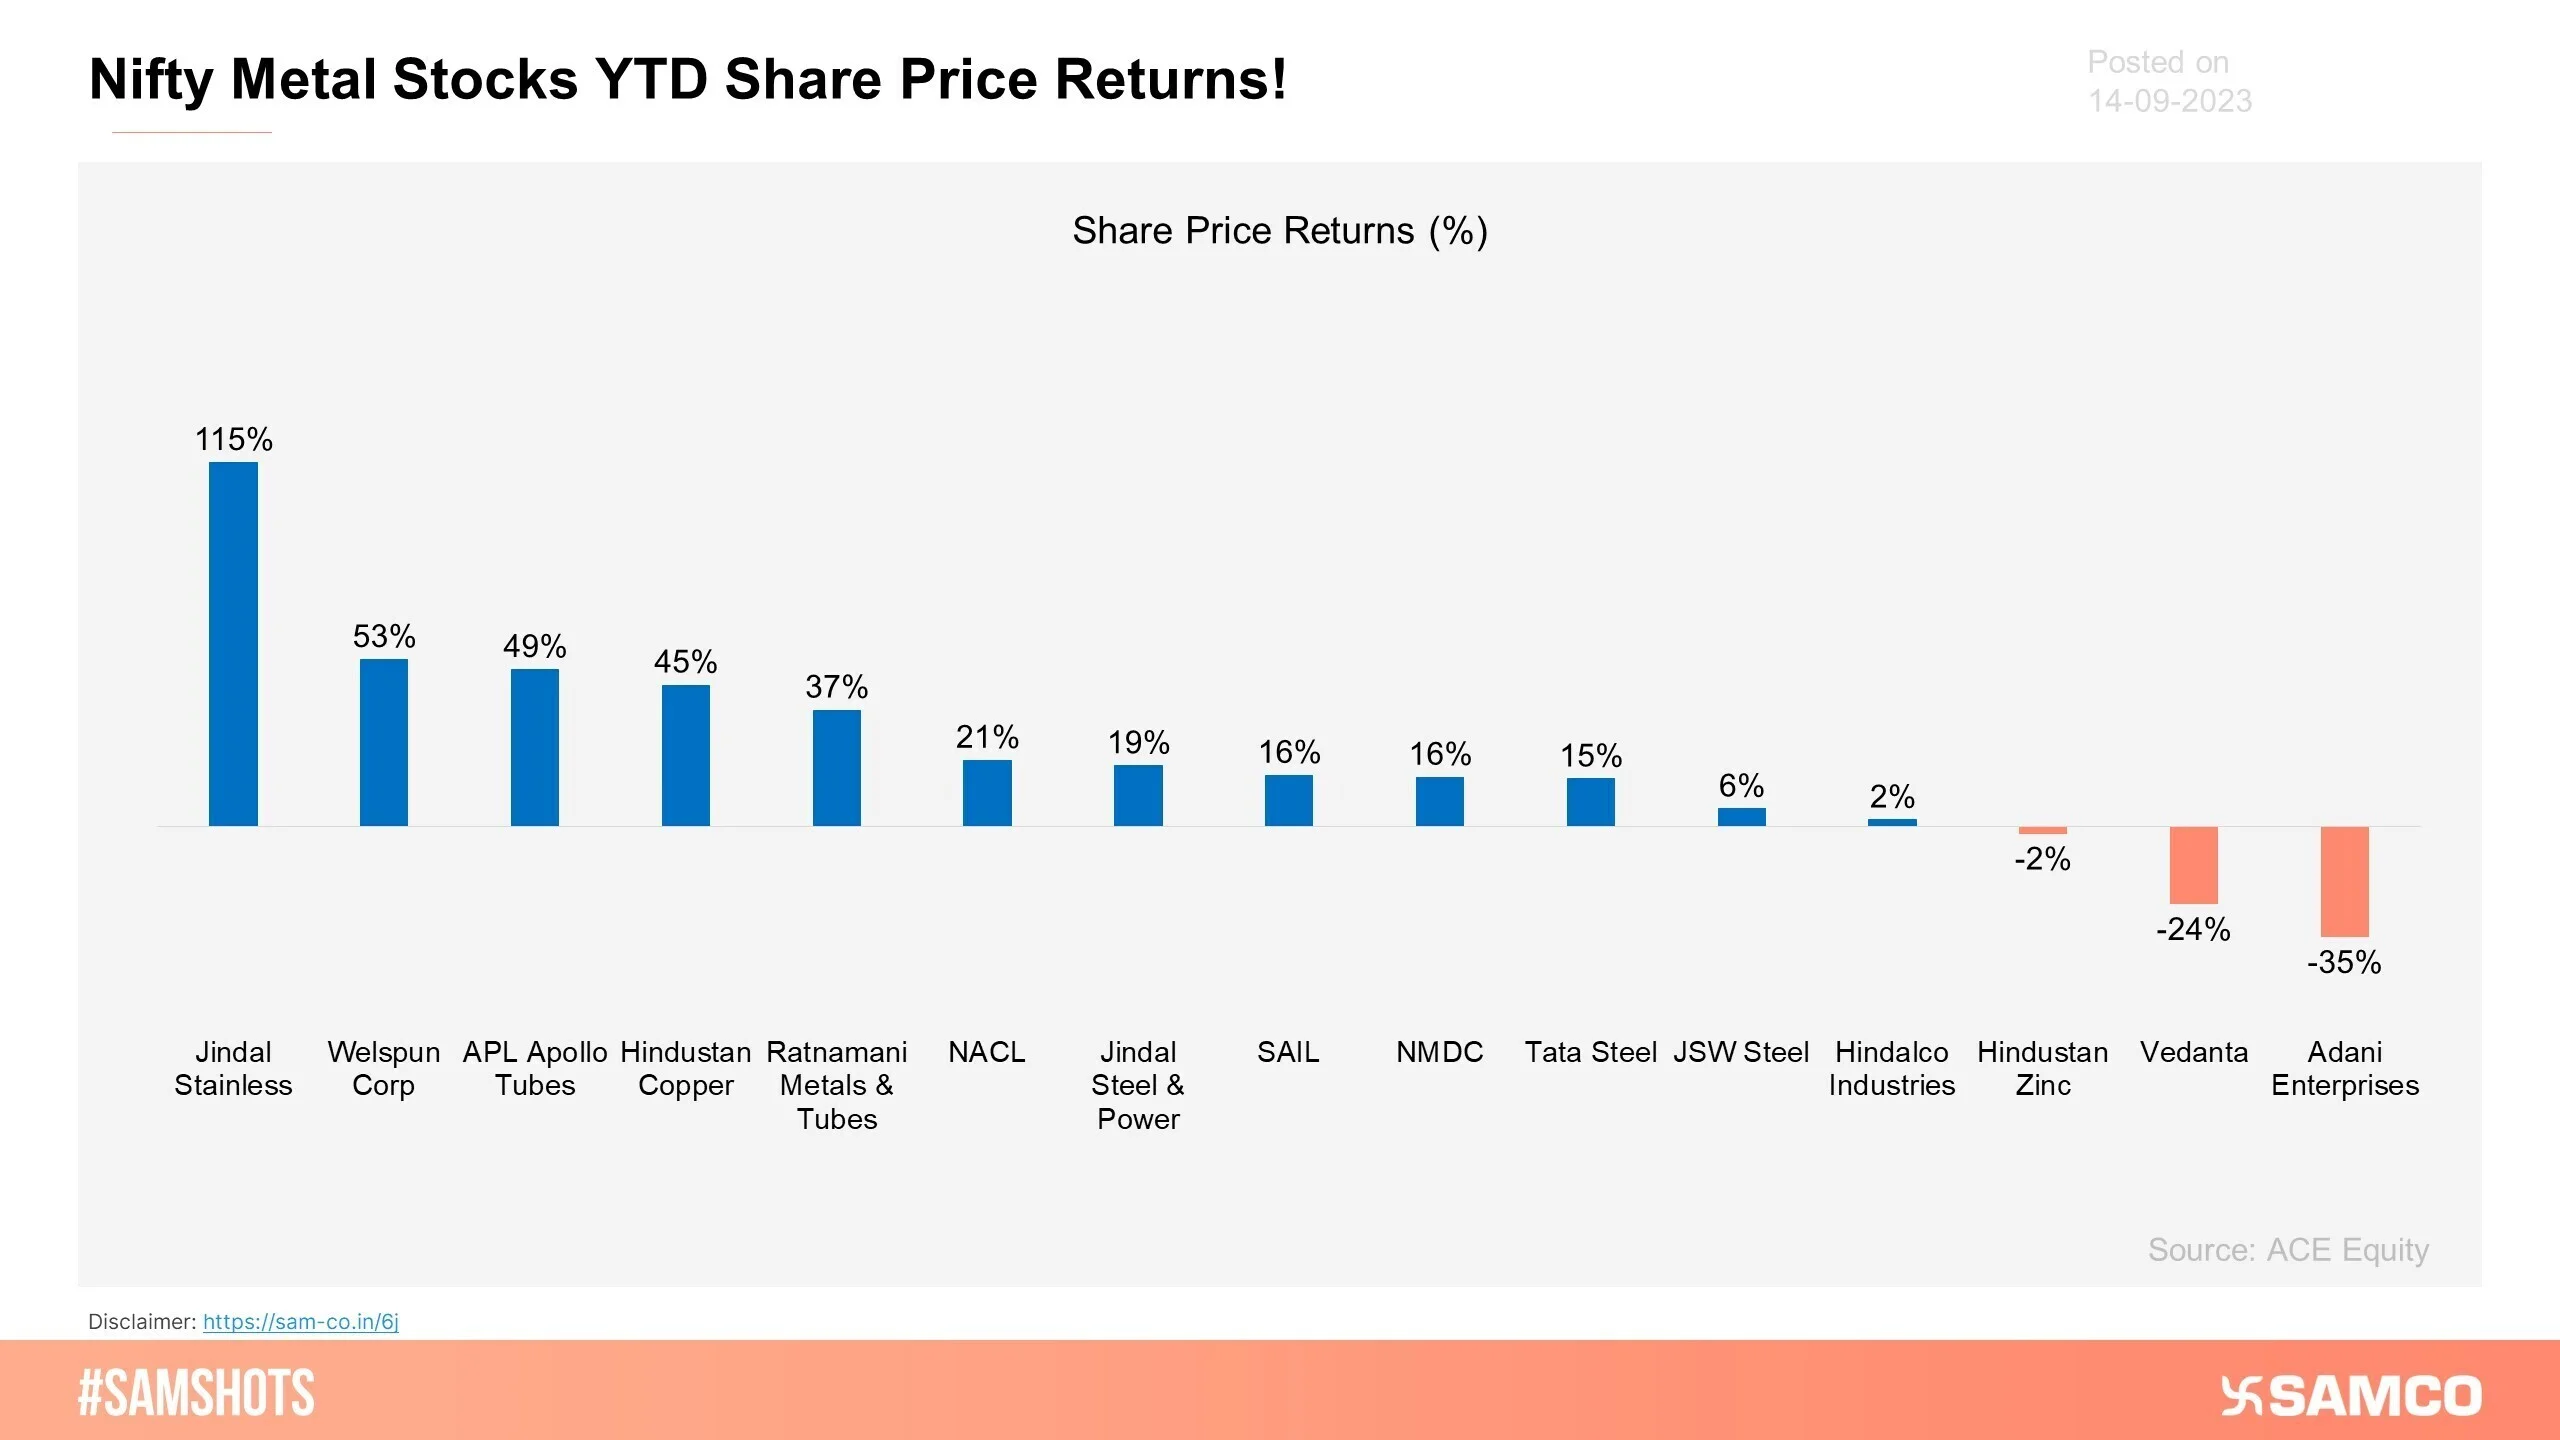 The chart below shows the Year-to-Date (YTD) returns delivered by Nifty Metal Stocks